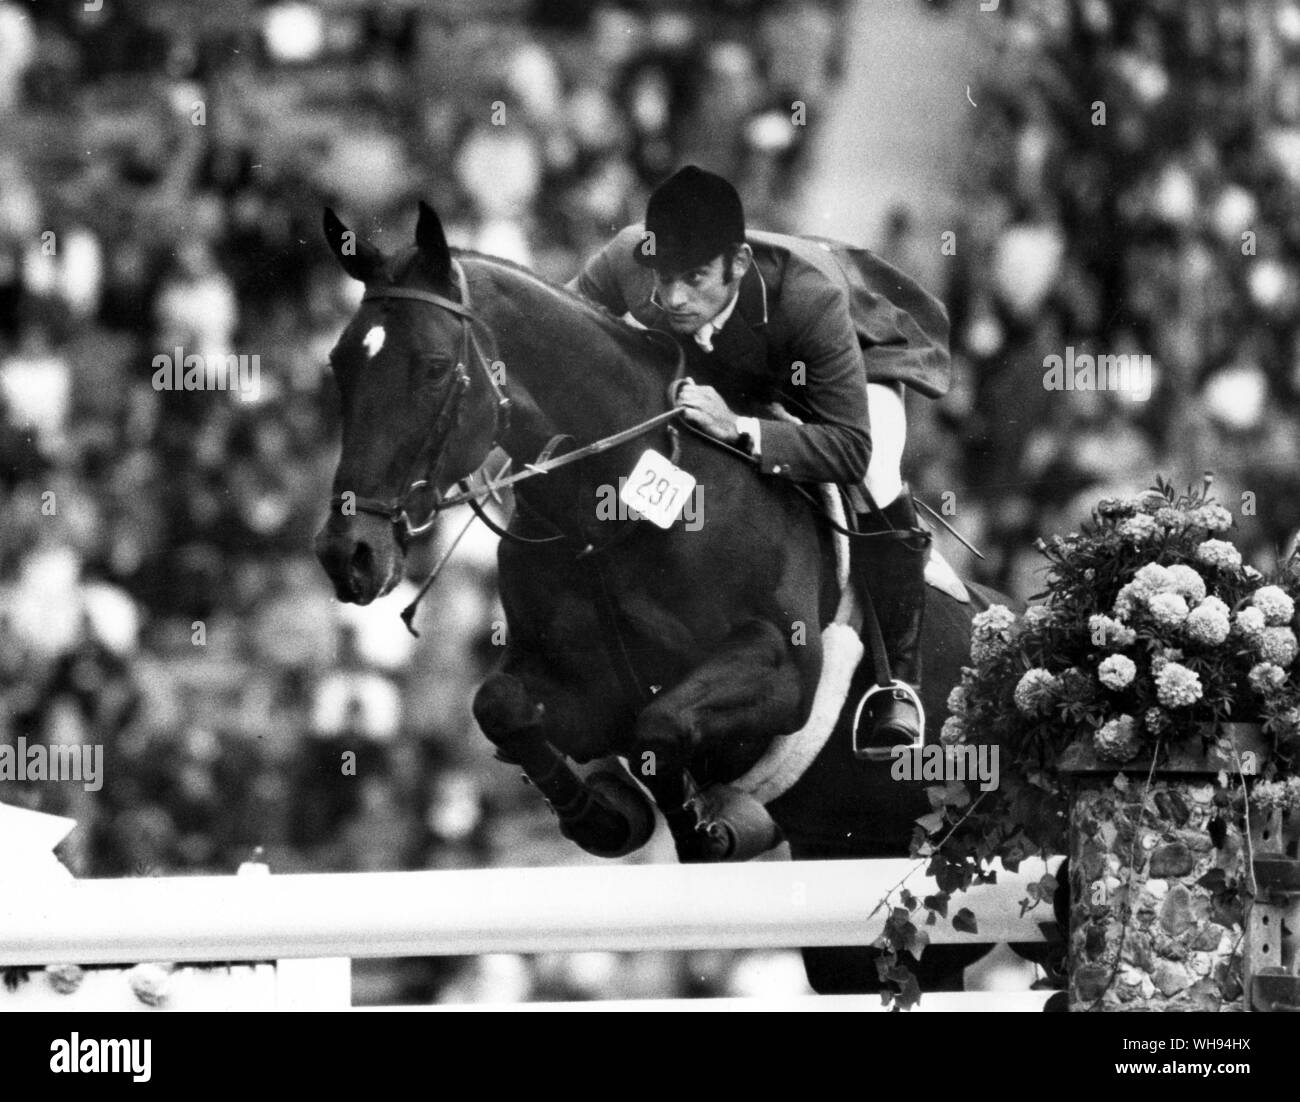 September 1972: Munich Olympics. N. Shapiro during the Prix des Nations Stock Photo